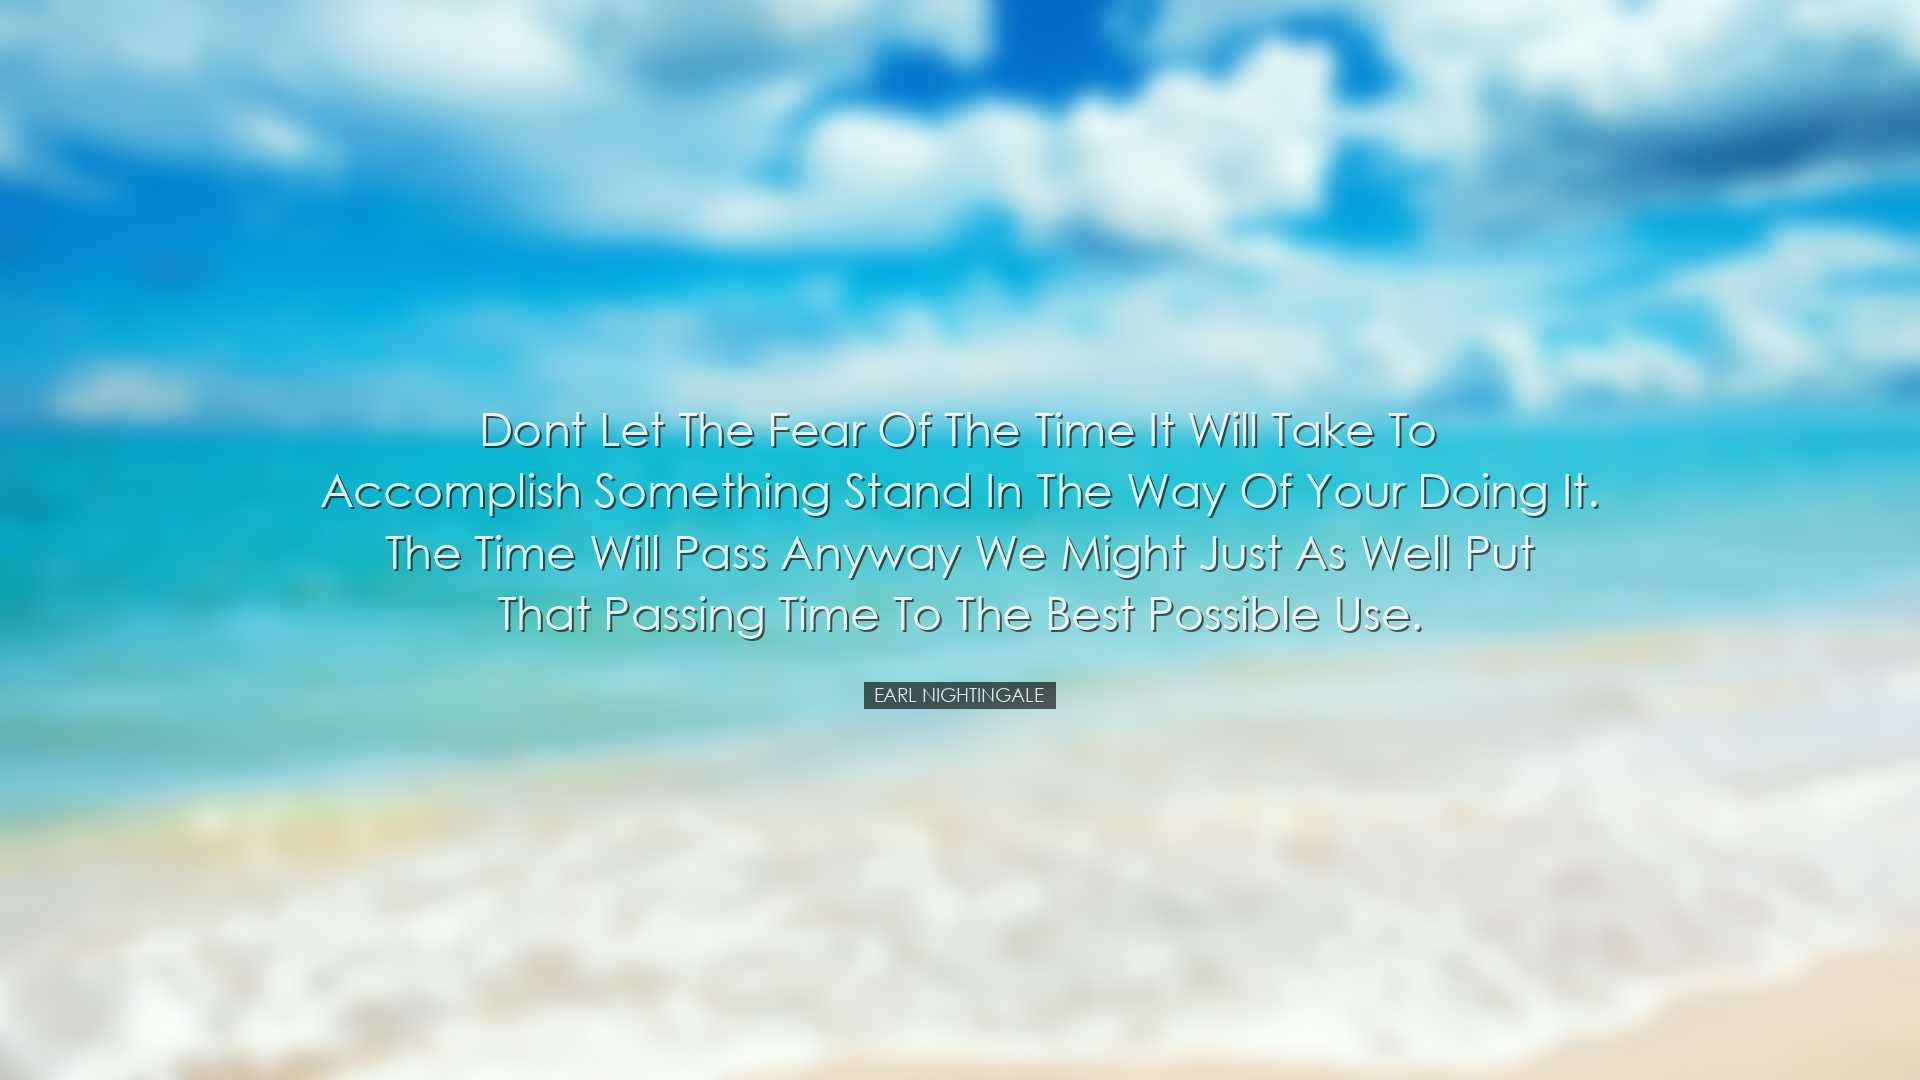 Dont let the fear of the time it will take to accomplish something